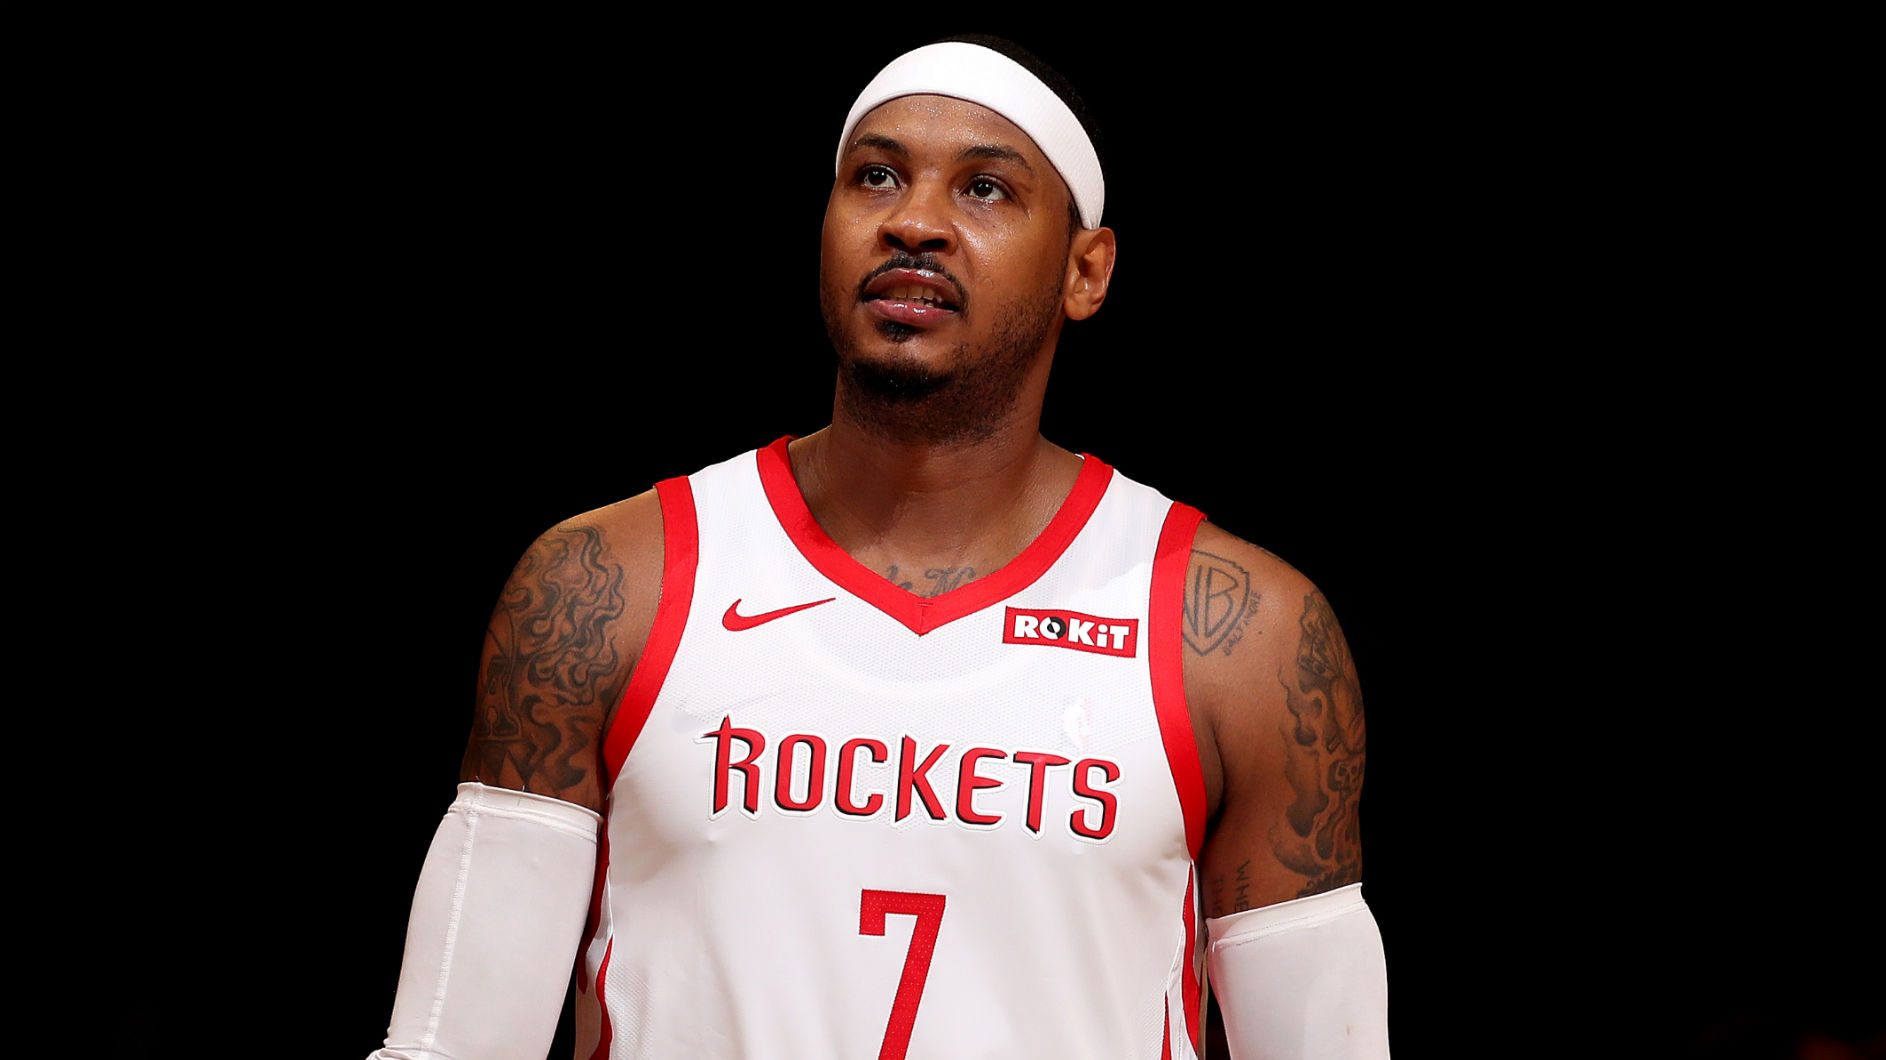 New Report Reveals Why Carmelo Anthony's NBA Career is Over